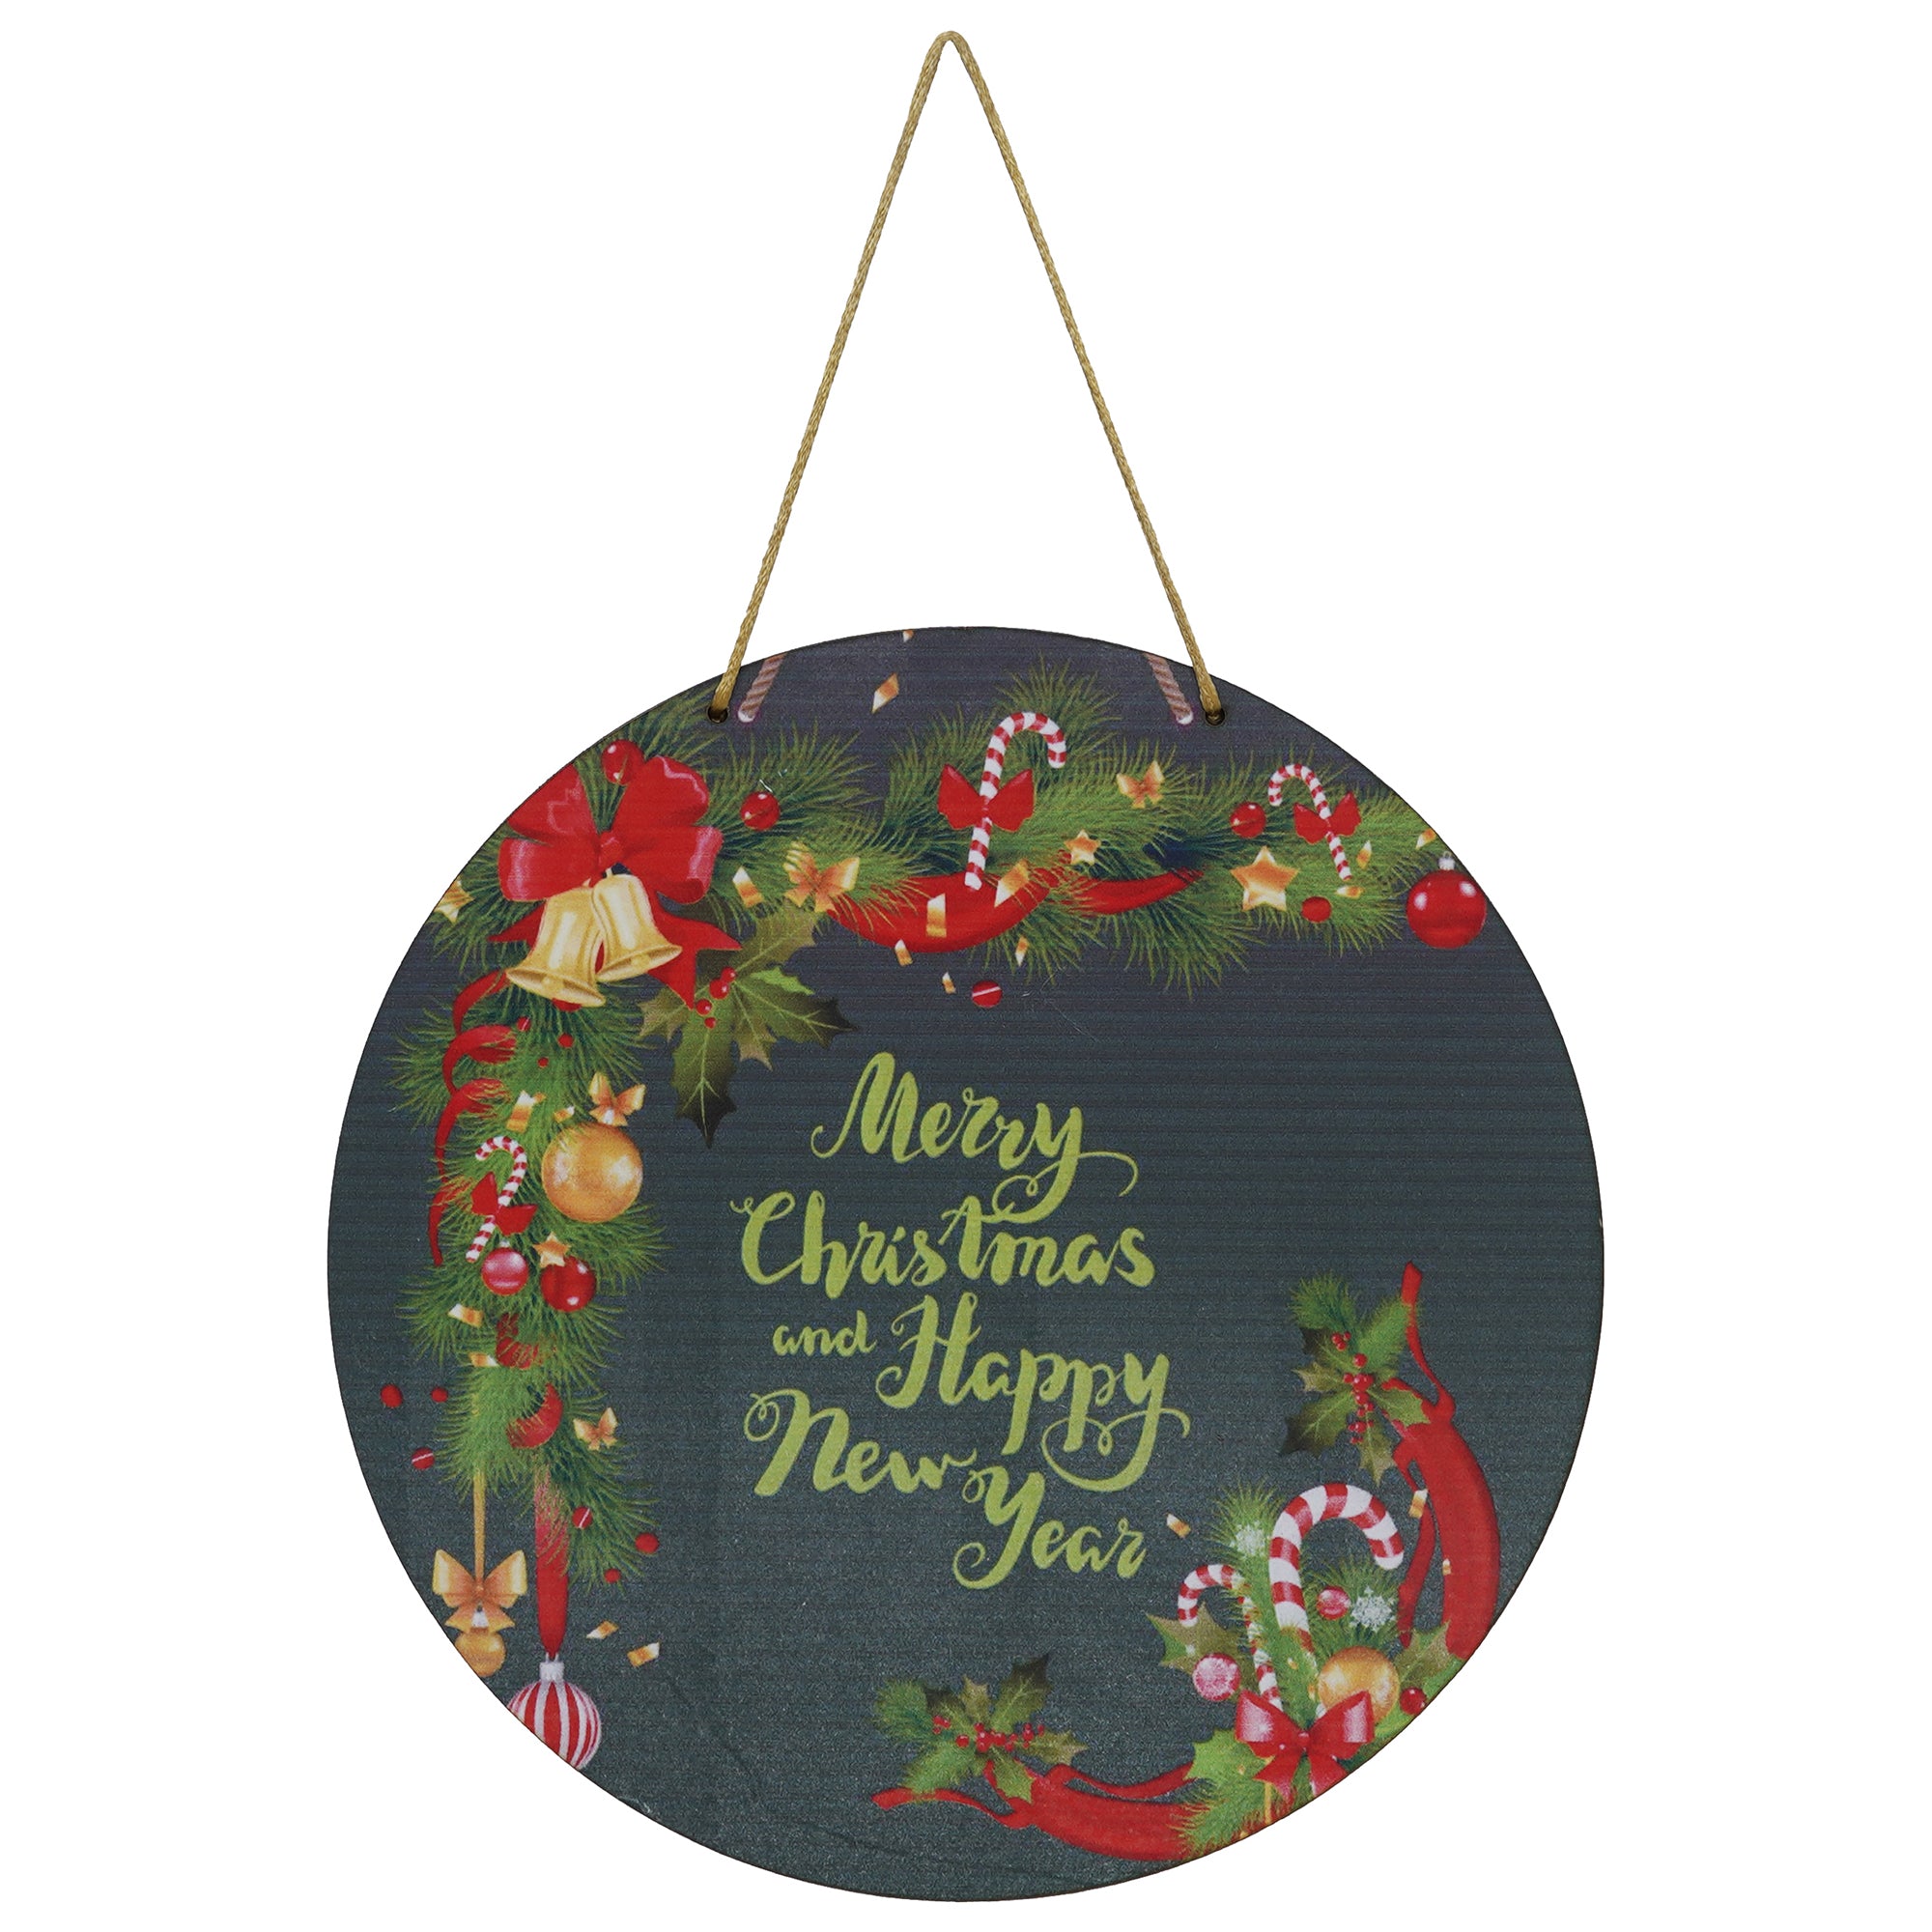 eCraftIndia "Merry Christmas and Happy New Year" Printed Wall/Door Hanging for Home and Christmas Decorations (Green, Red, Golden) 2